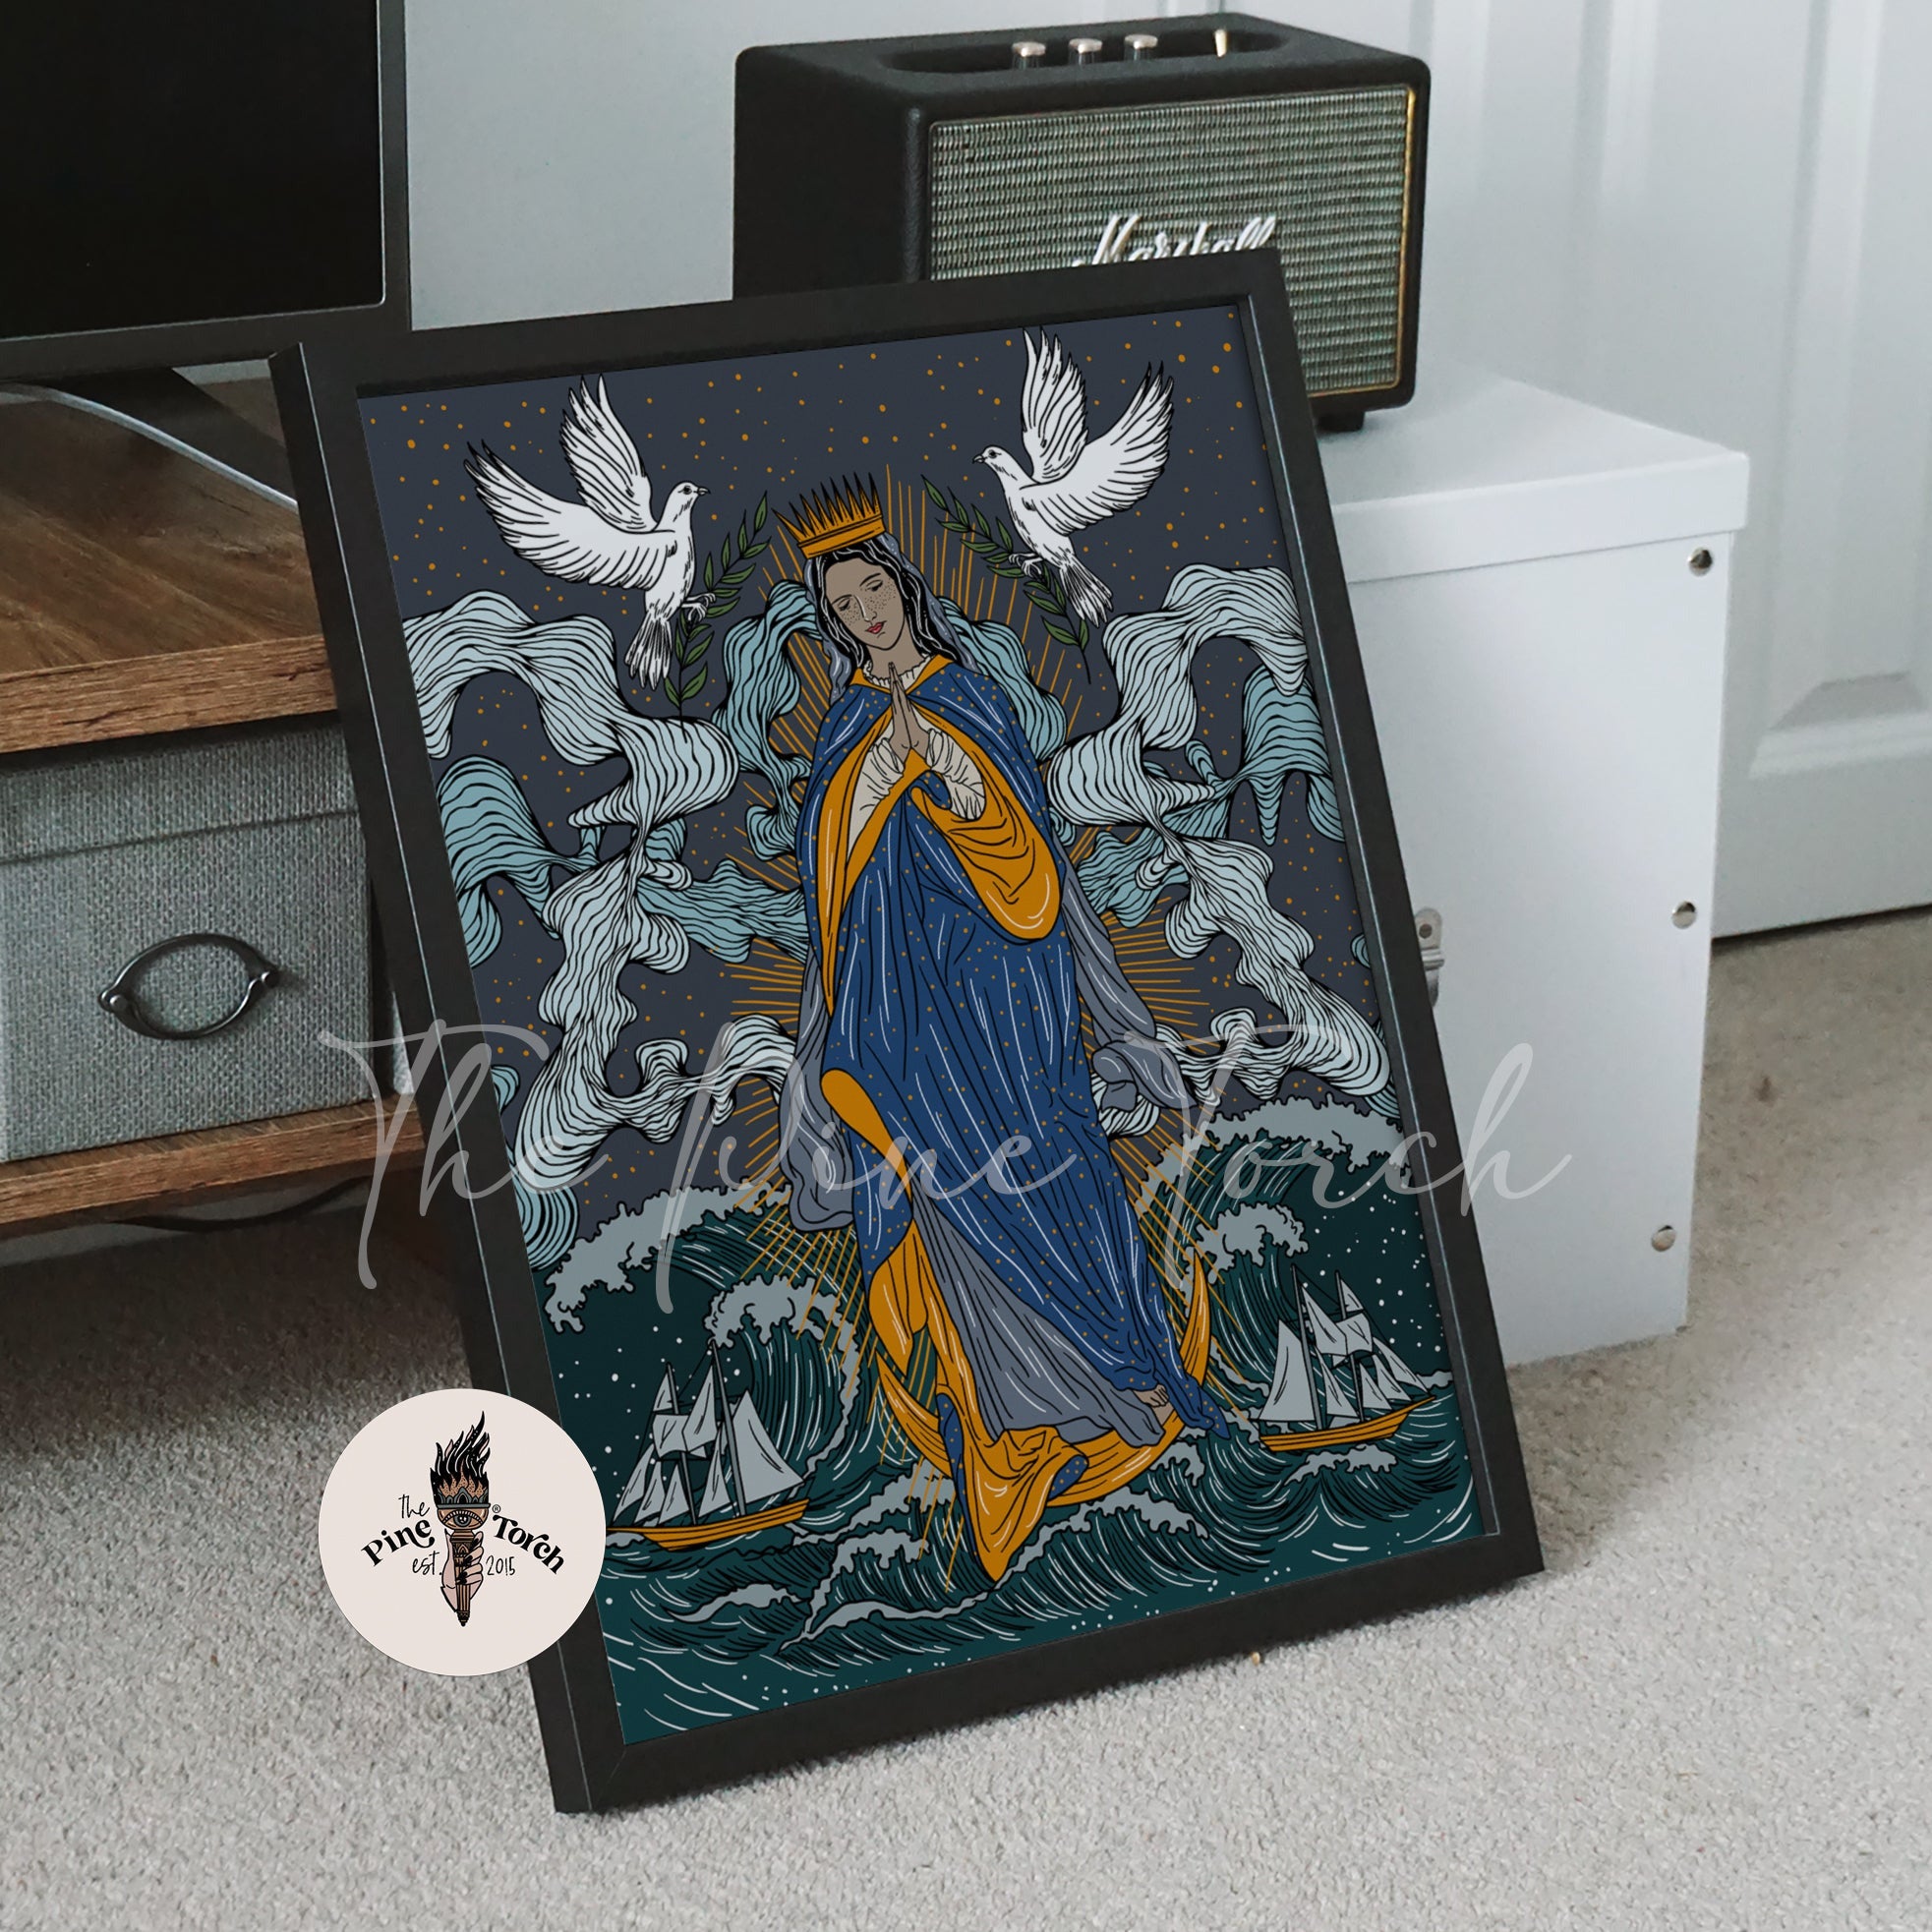 MARY STAR OF THE SEA // FRAMED POSTER PRINT